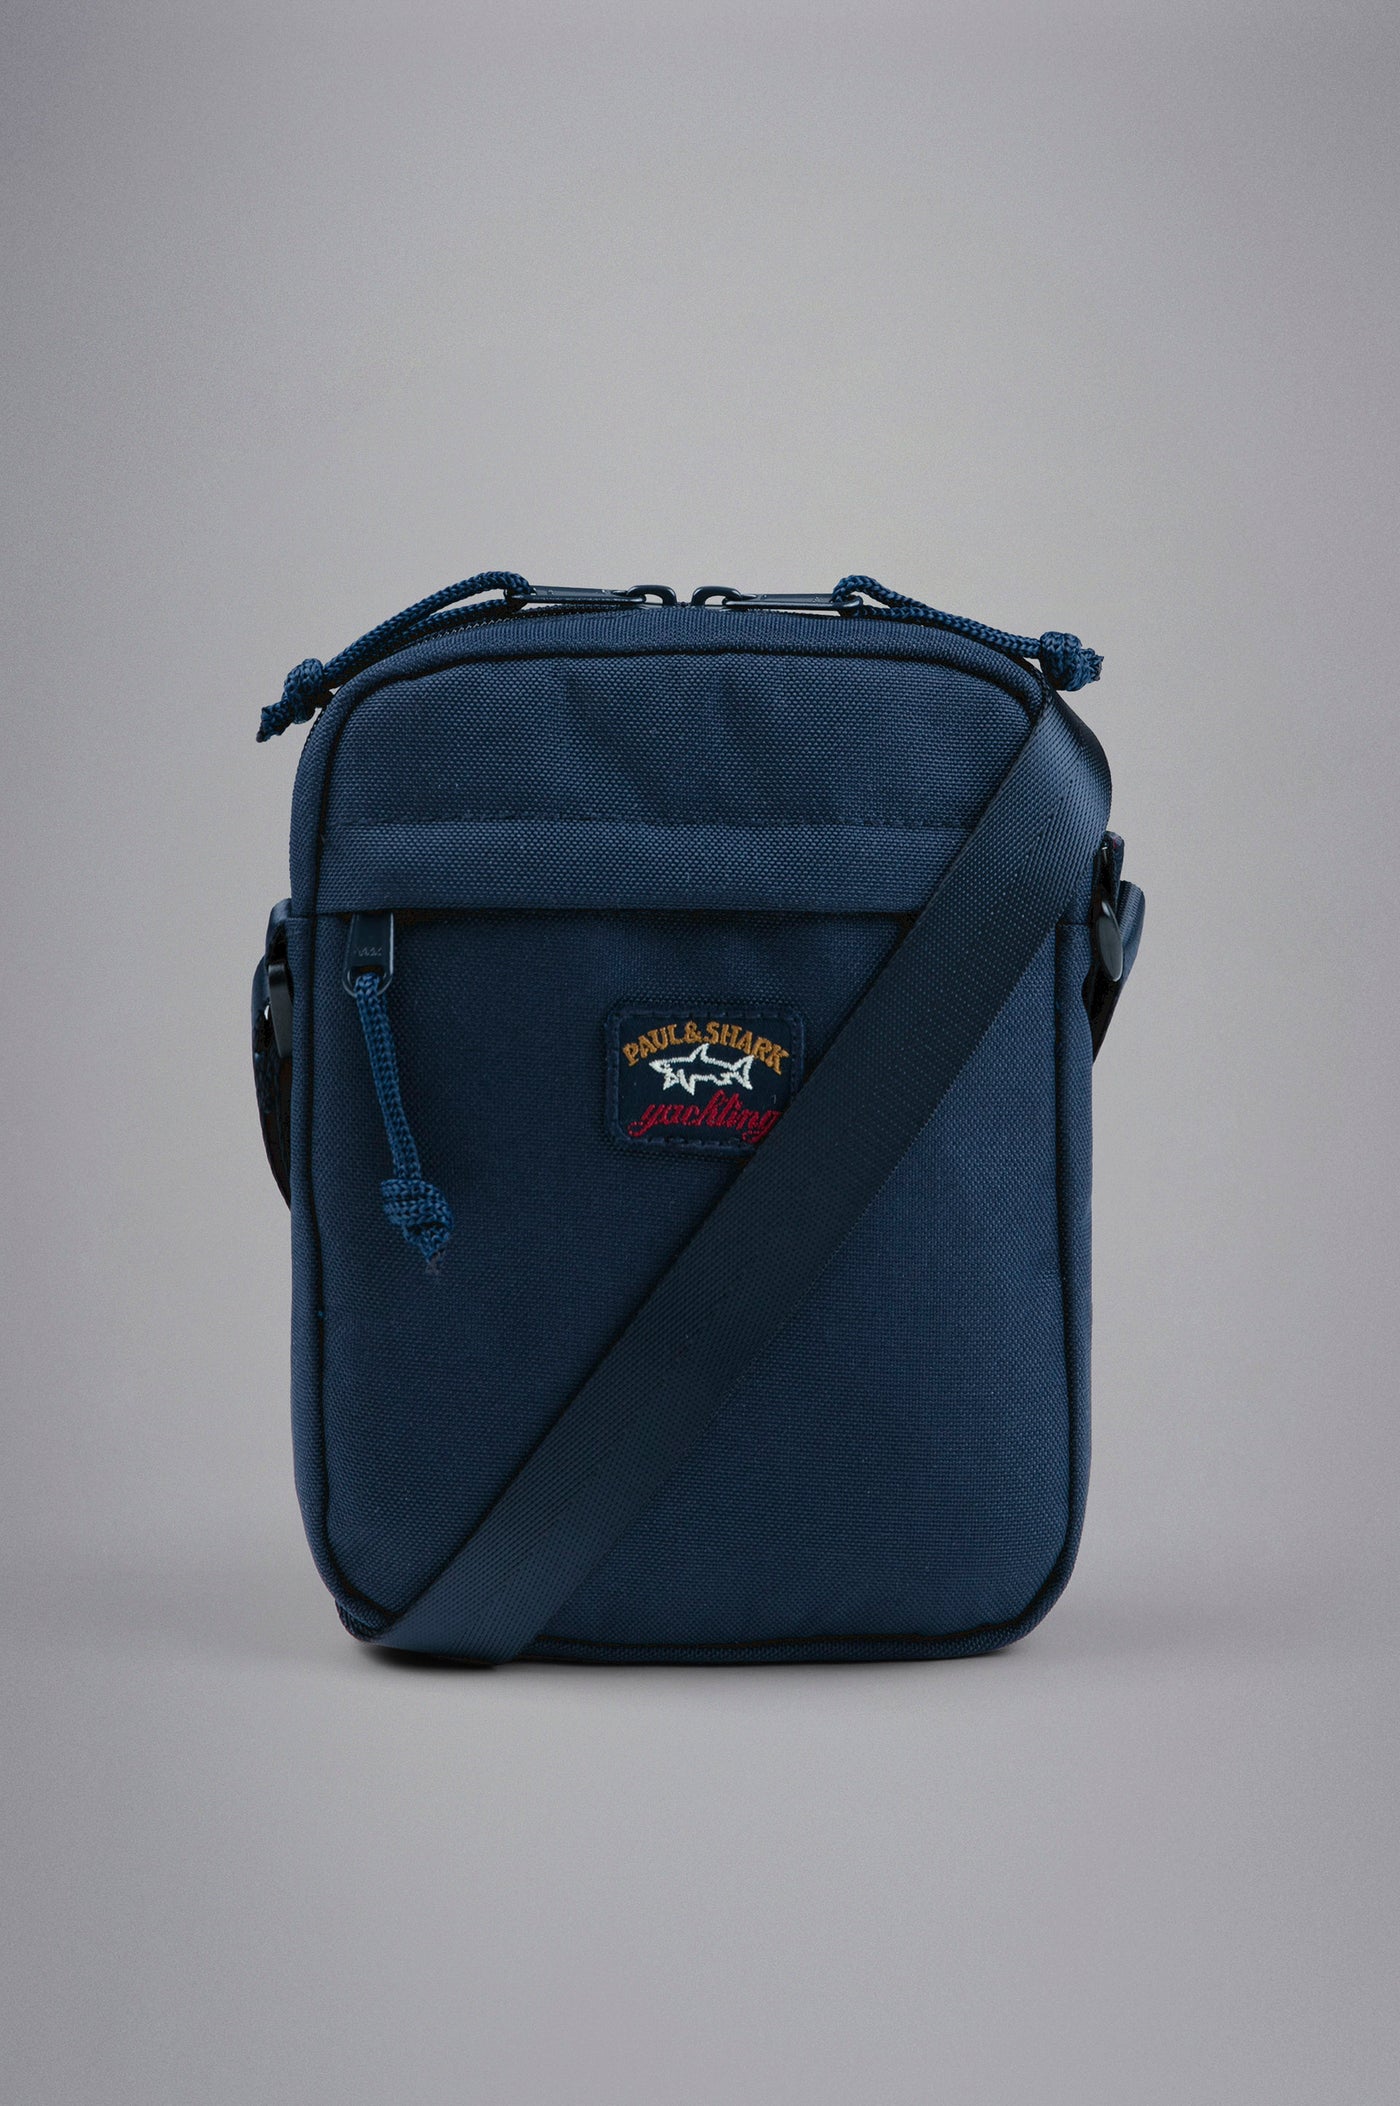 Paul & Shark Reporter Bag with Iconic Badge | Navy